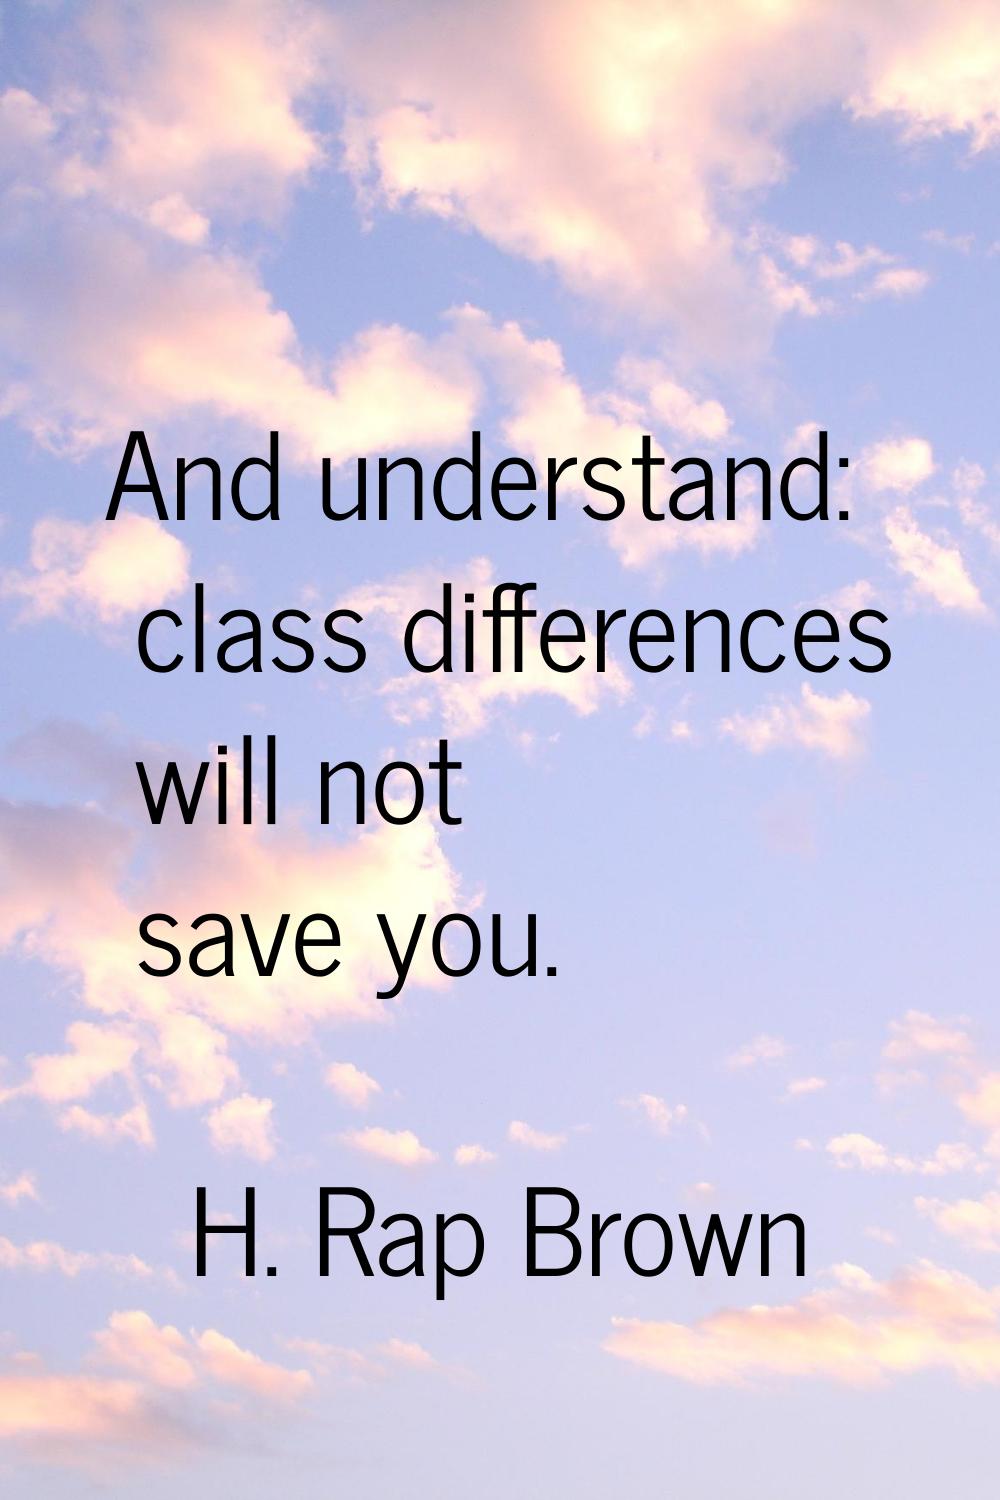 And understand: class differences will not save you.